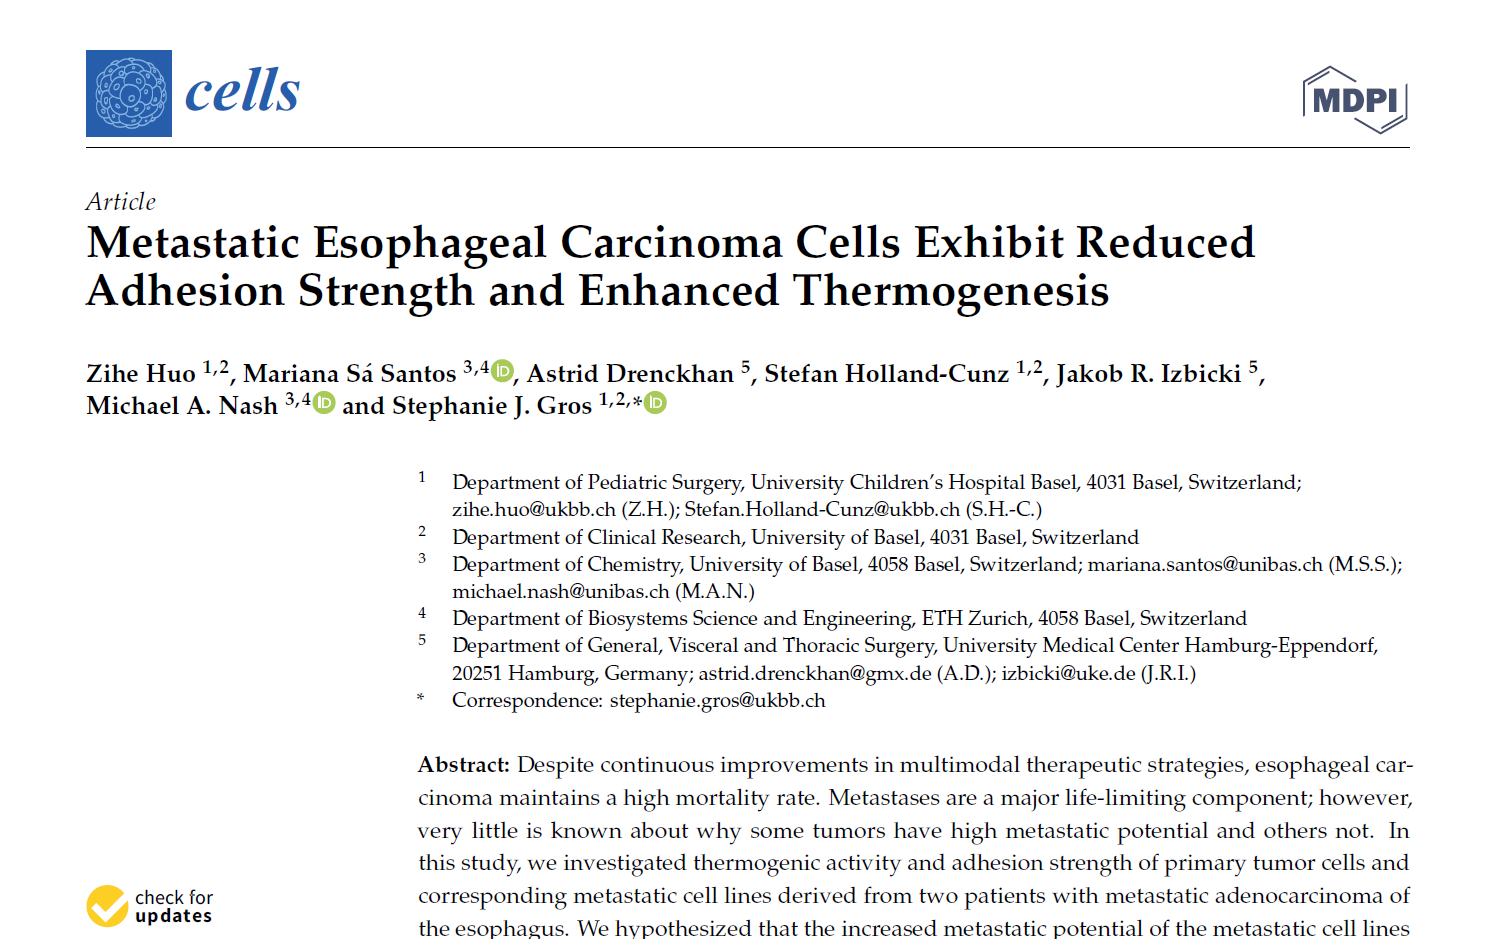 Metastatic Esophageal Carcinoma Cells Exhibit Reduced Adhesion Strength and Enhanced Thermogenesis